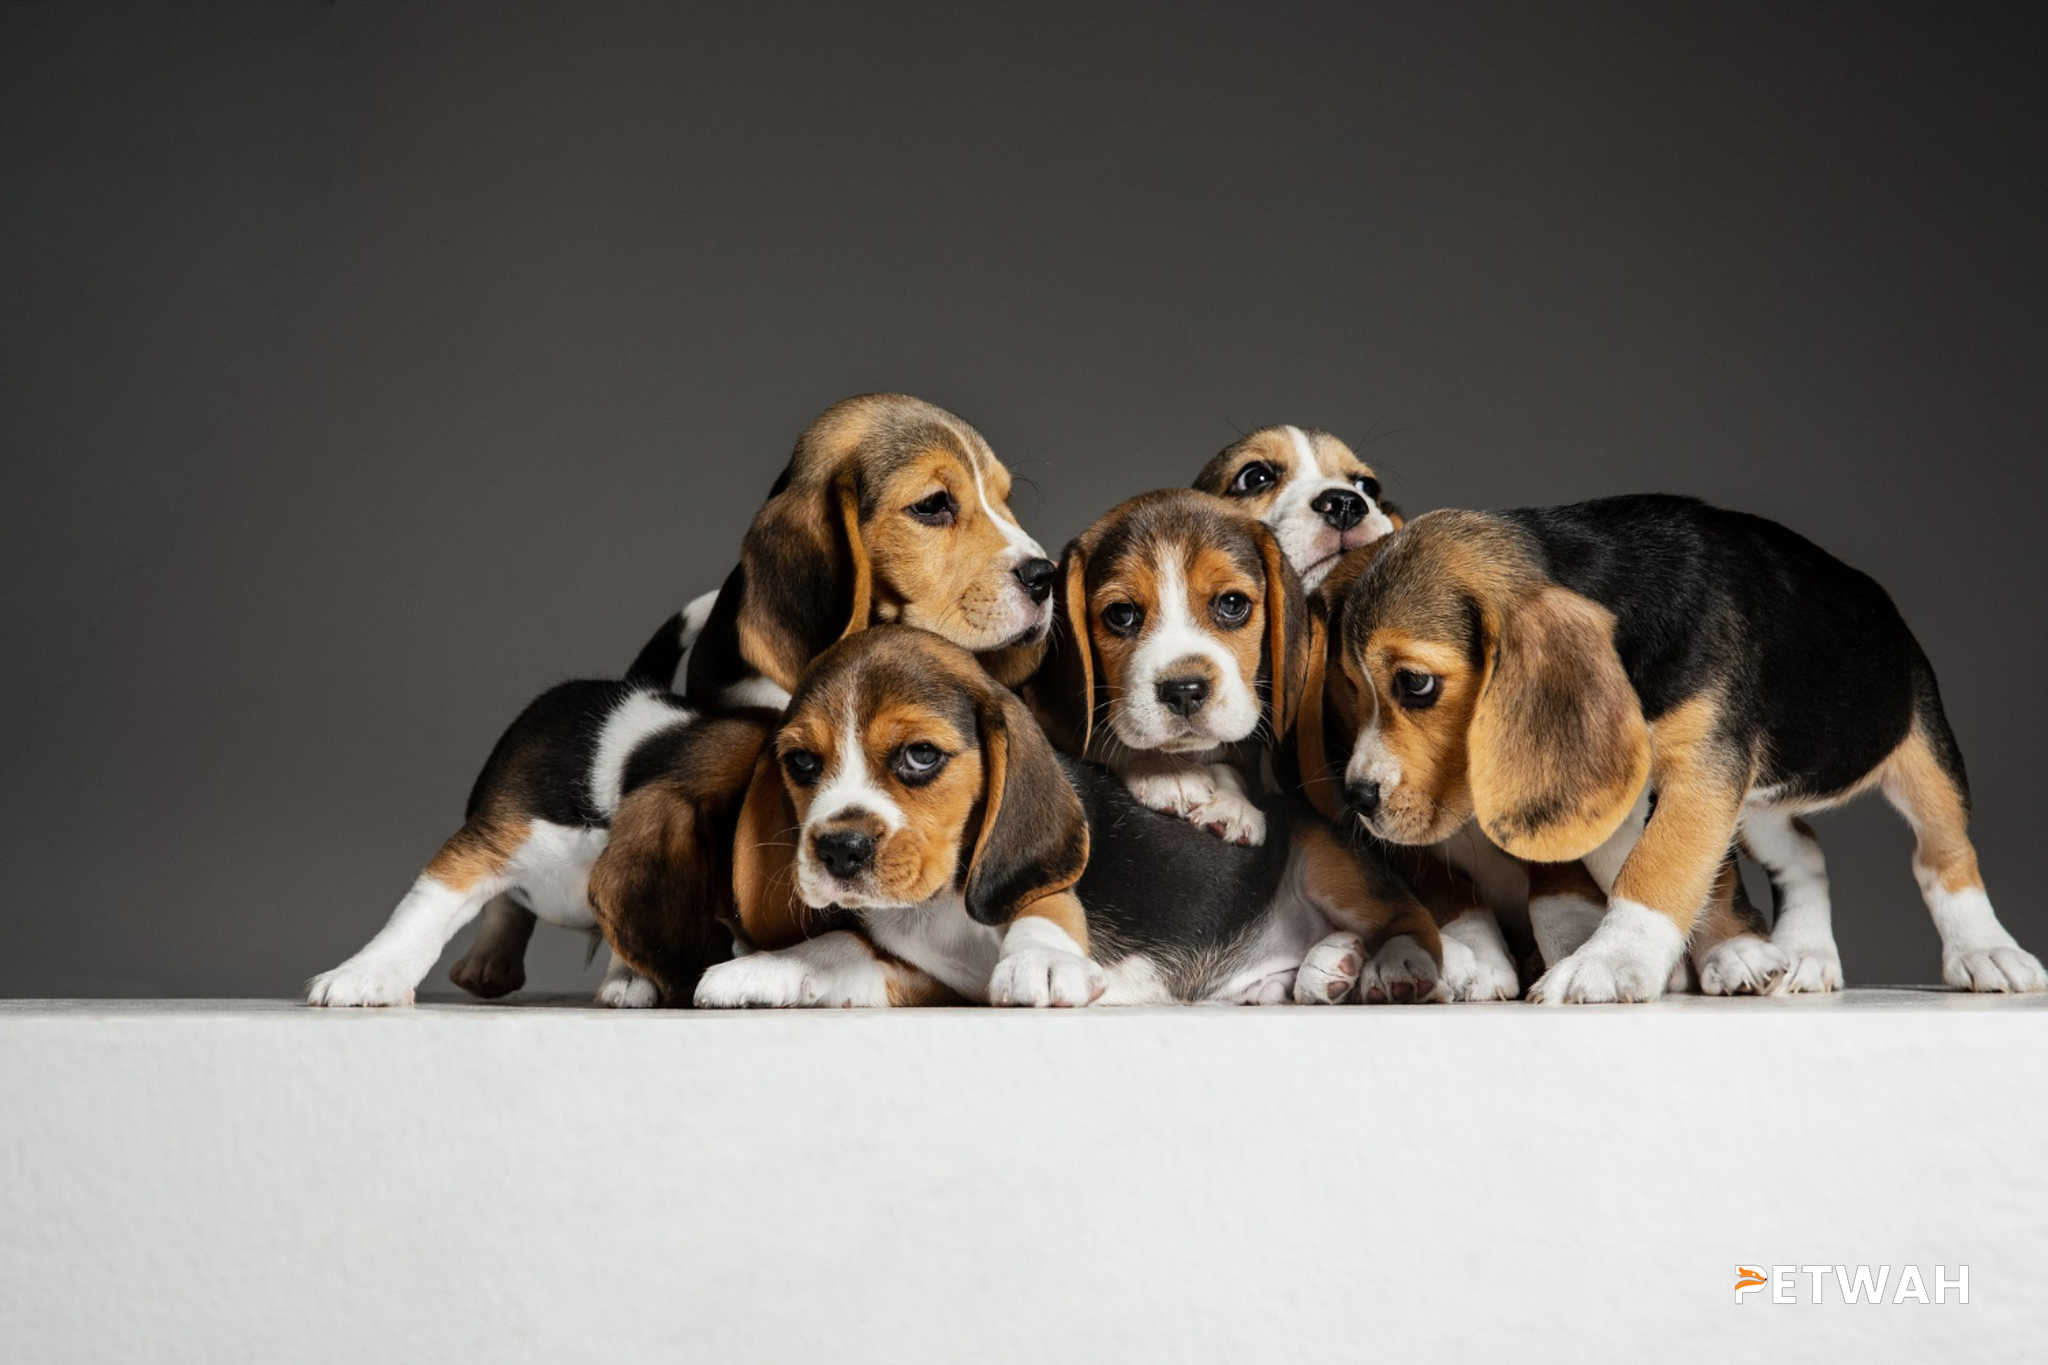 Effective Socialization Strategies for Your Beagle with Dogs and People